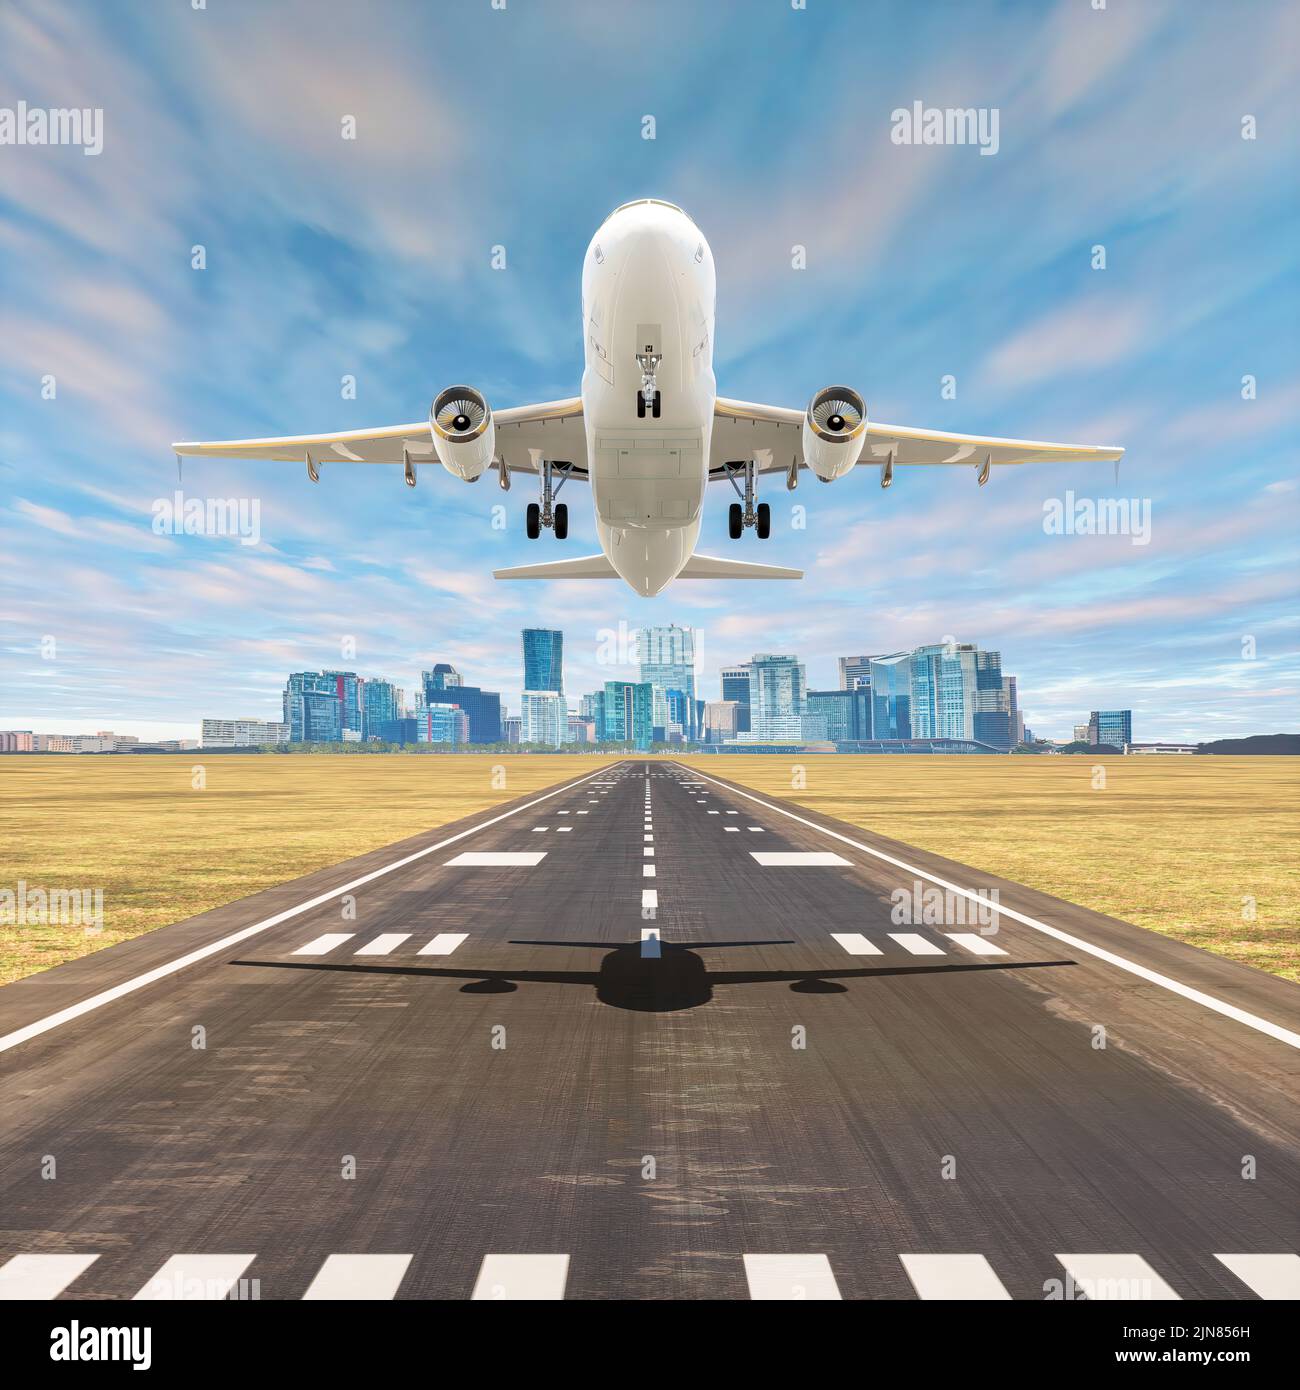 Commercial airplane Takeoff  on airport runway with city in the background and beautiful afternoon skies, 3D illustration. Stock Photo